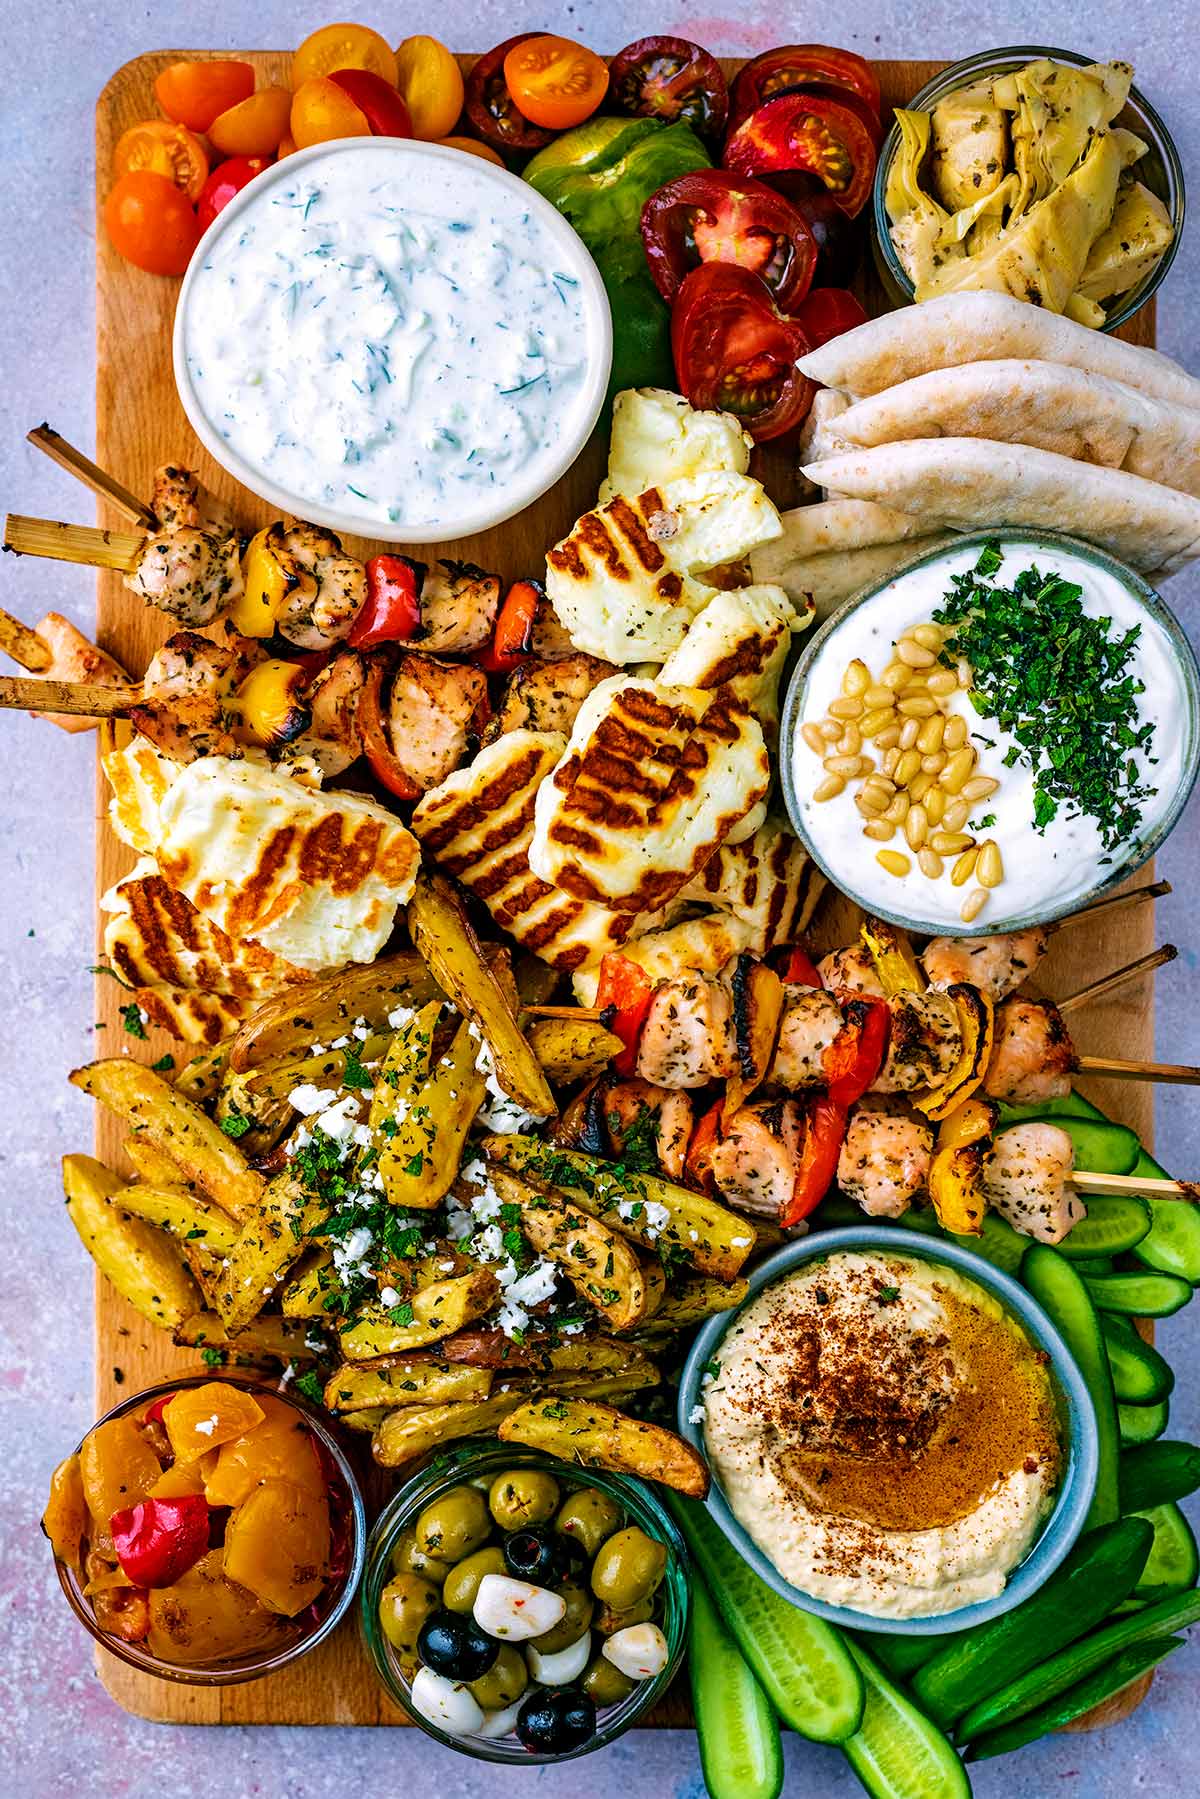 A meze platter made up of vegetables, chicken, bread, dips and cheese.